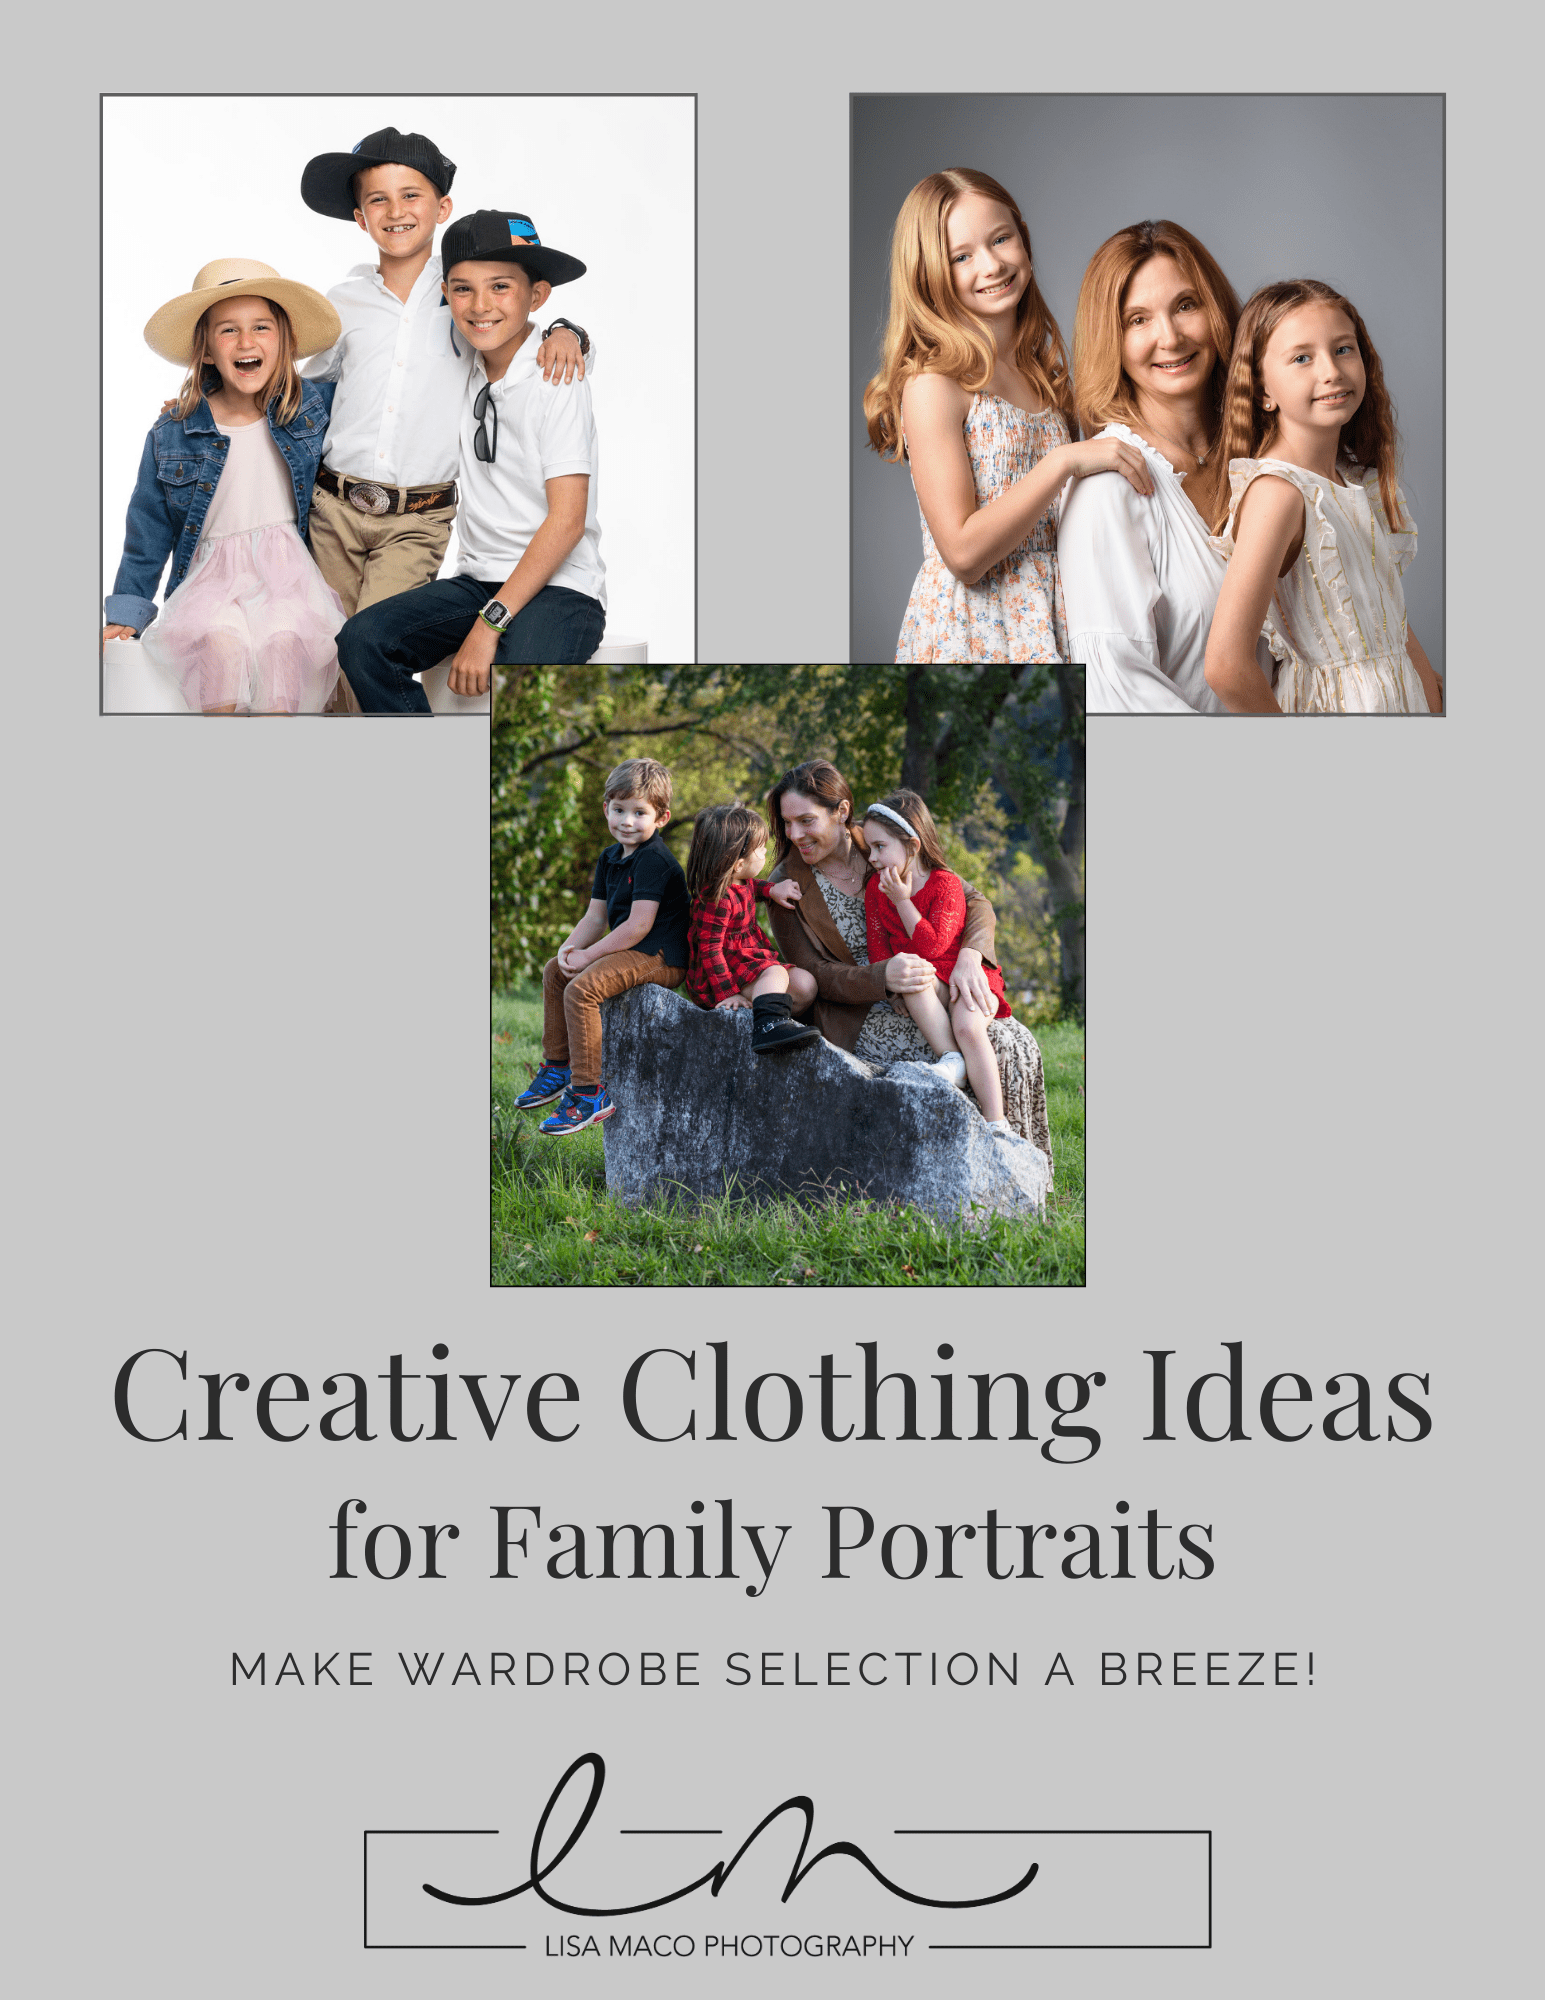 Creative Clothing Ideas for Family Portraits Guide